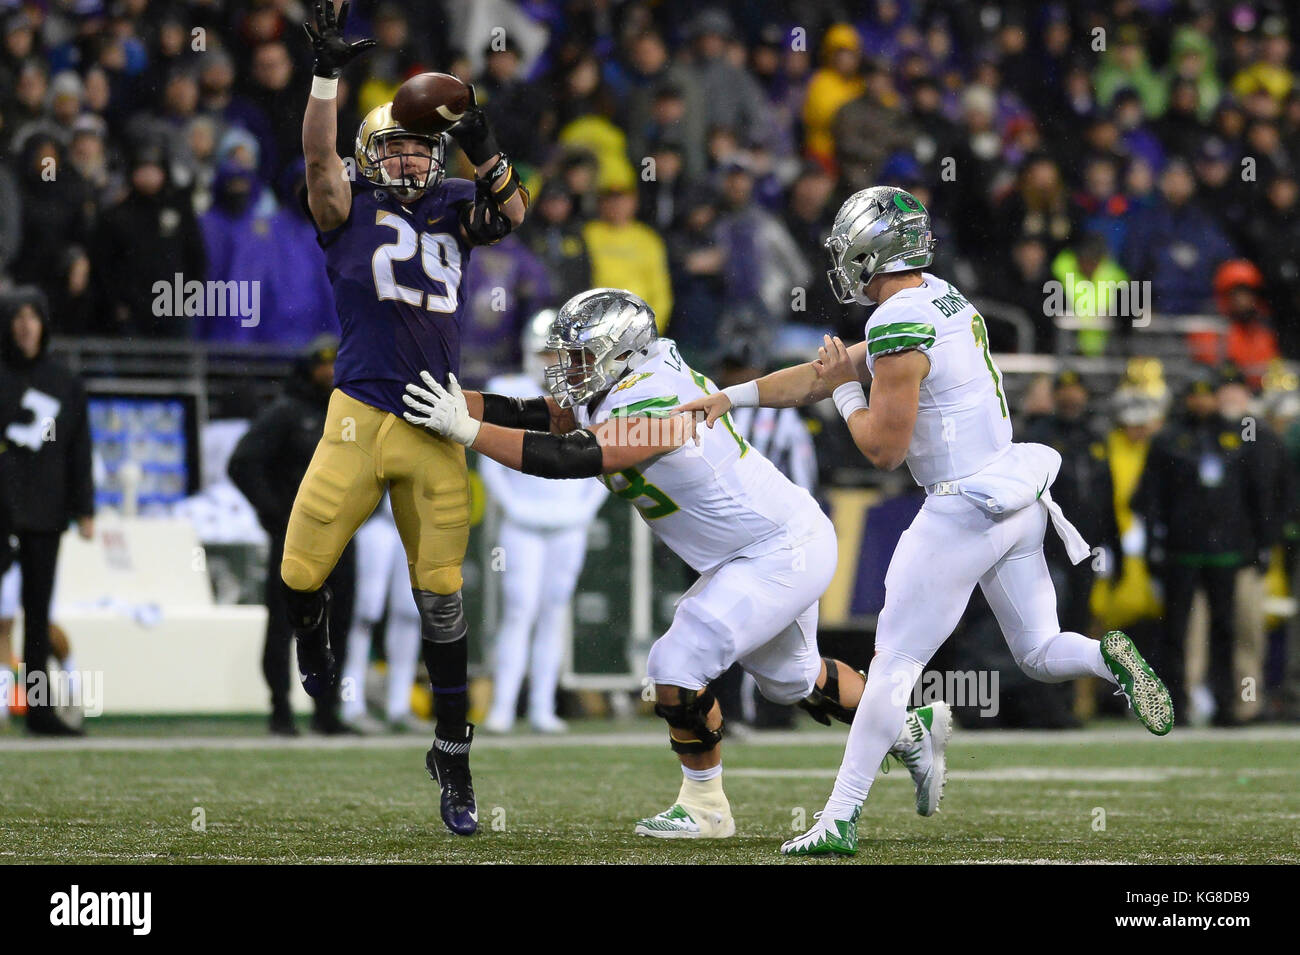 Seattle, WA, USA. 4th Nov, 2017. UW linebacker Connor O'Brien (29) tries to block a Braxton Burmeister (11) pass in a PAC12 football game between the Oregon Ducks and the Washington Huskies. The game was played at Husky Stadium on the University of Washington campus in Seattle, WA. Jeff Halstead/CSM/Alamy Live News Stock Photo